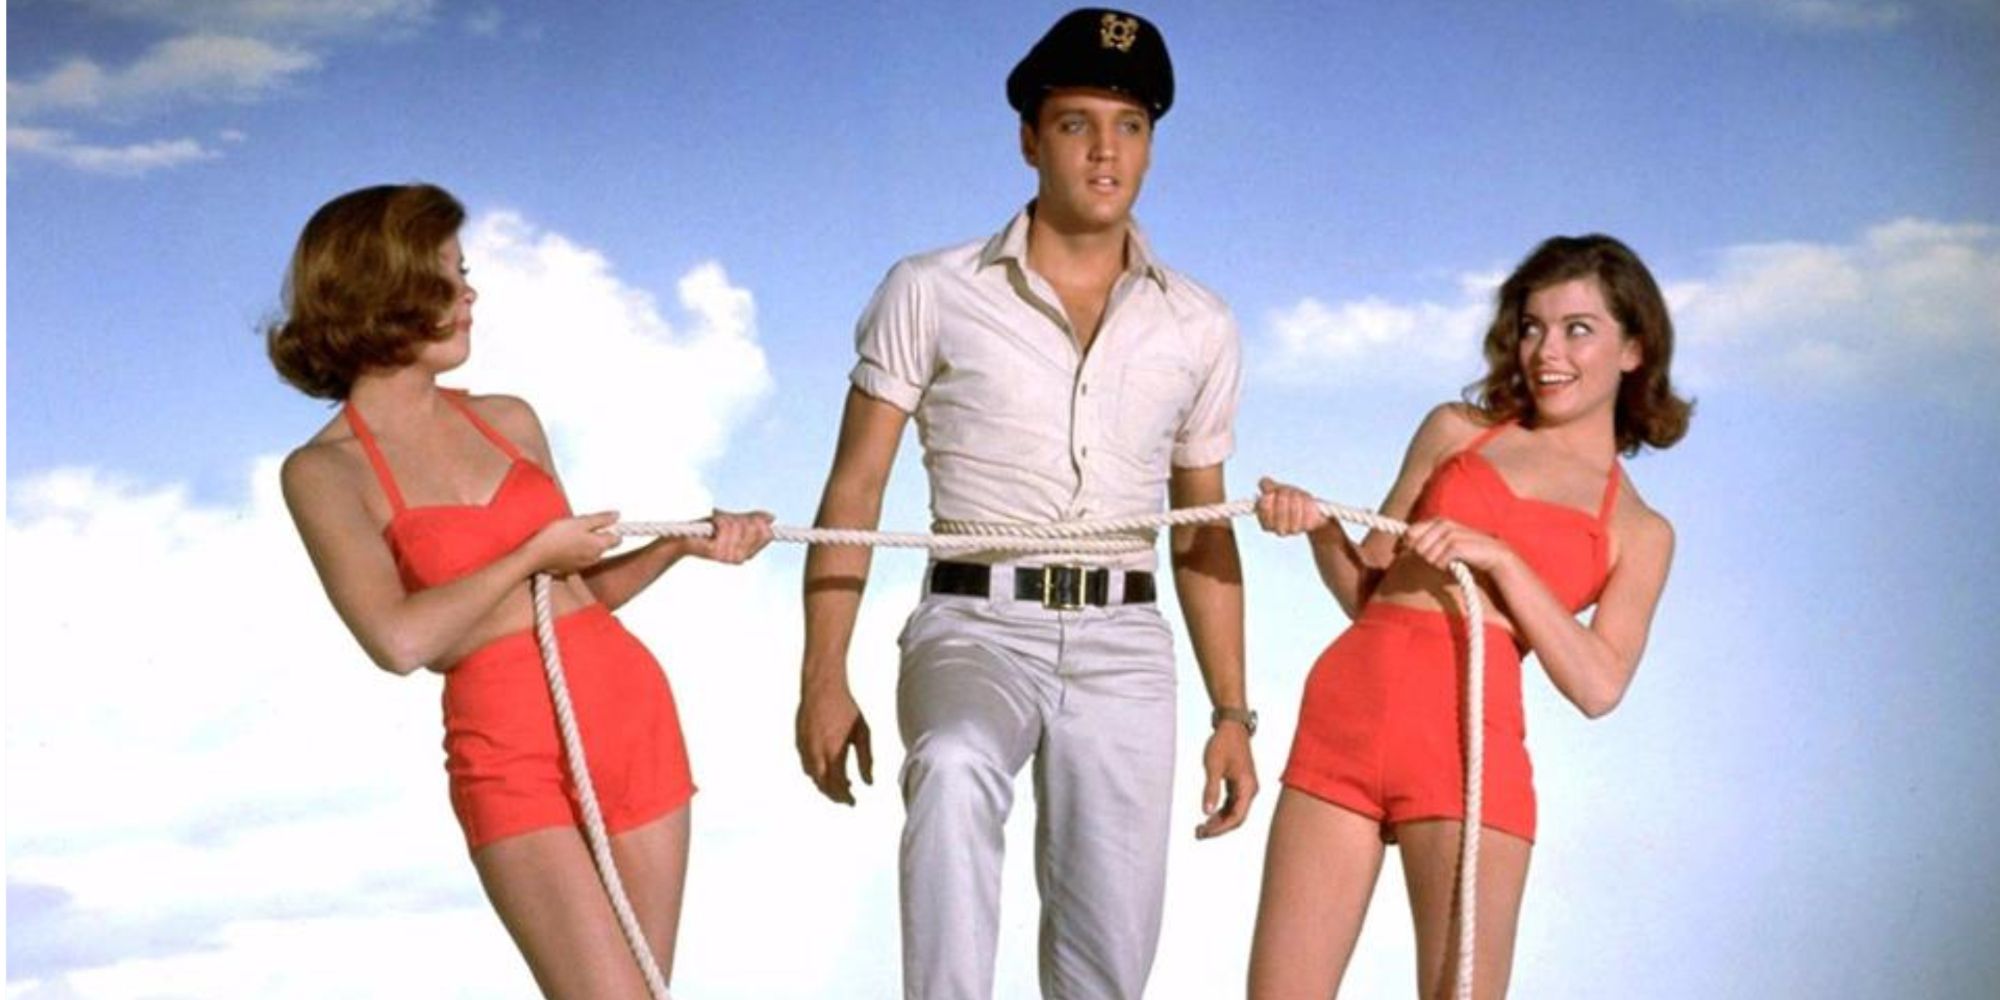 Elvis Presley with a Captain's hat on and two girls tugging at a rope in front of him